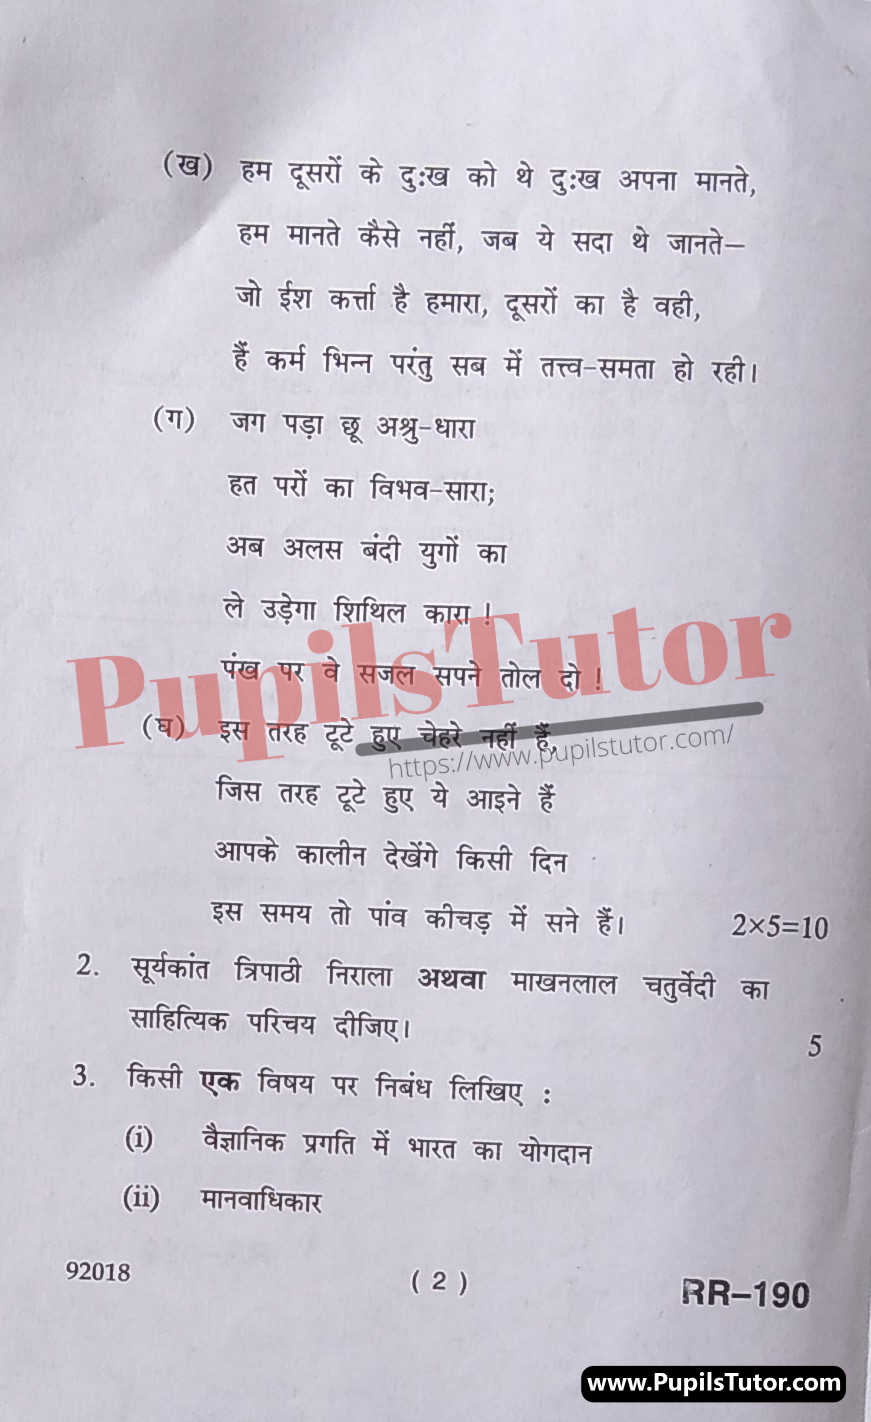 M.D. University B.Sc. Hindi (Compulsory) Third Semester Important Question Answer And Solution - www.pupilstutor.com (Paper Page Number 2)